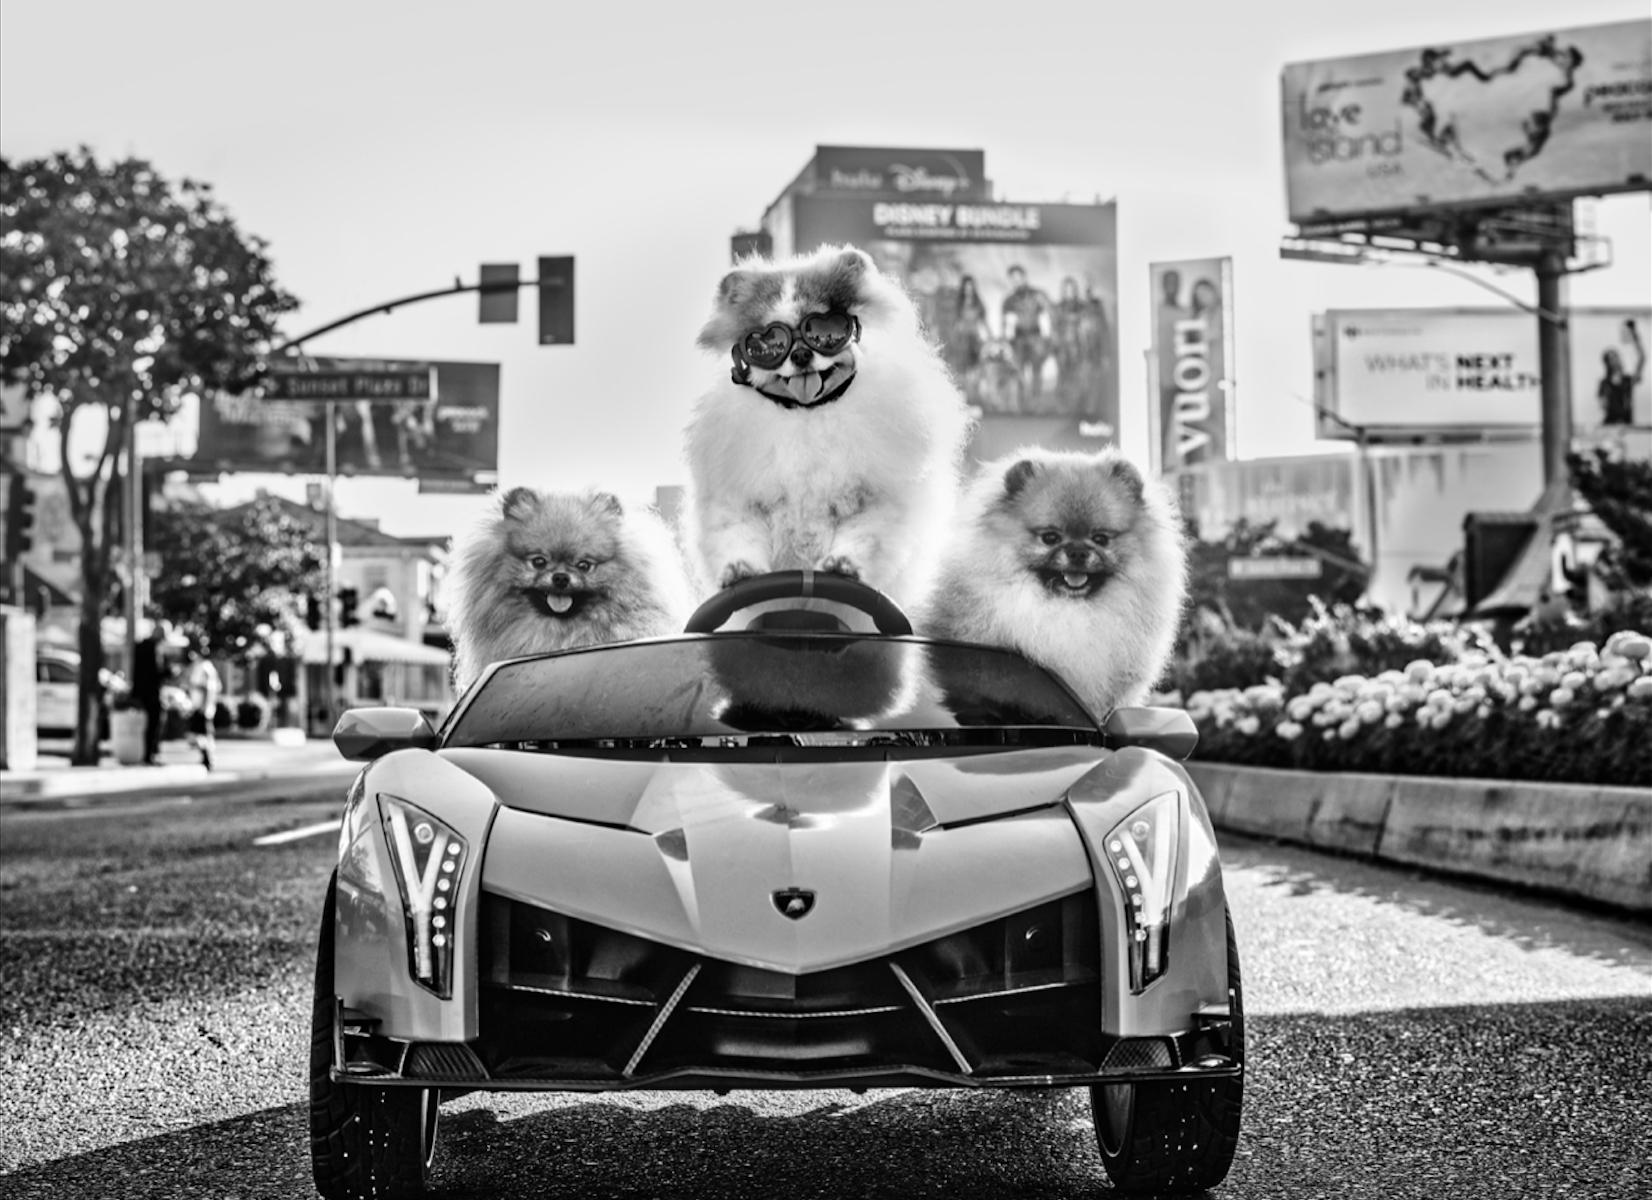 David Yarrow Black and White Photograph - Who Let the Dogs Out?